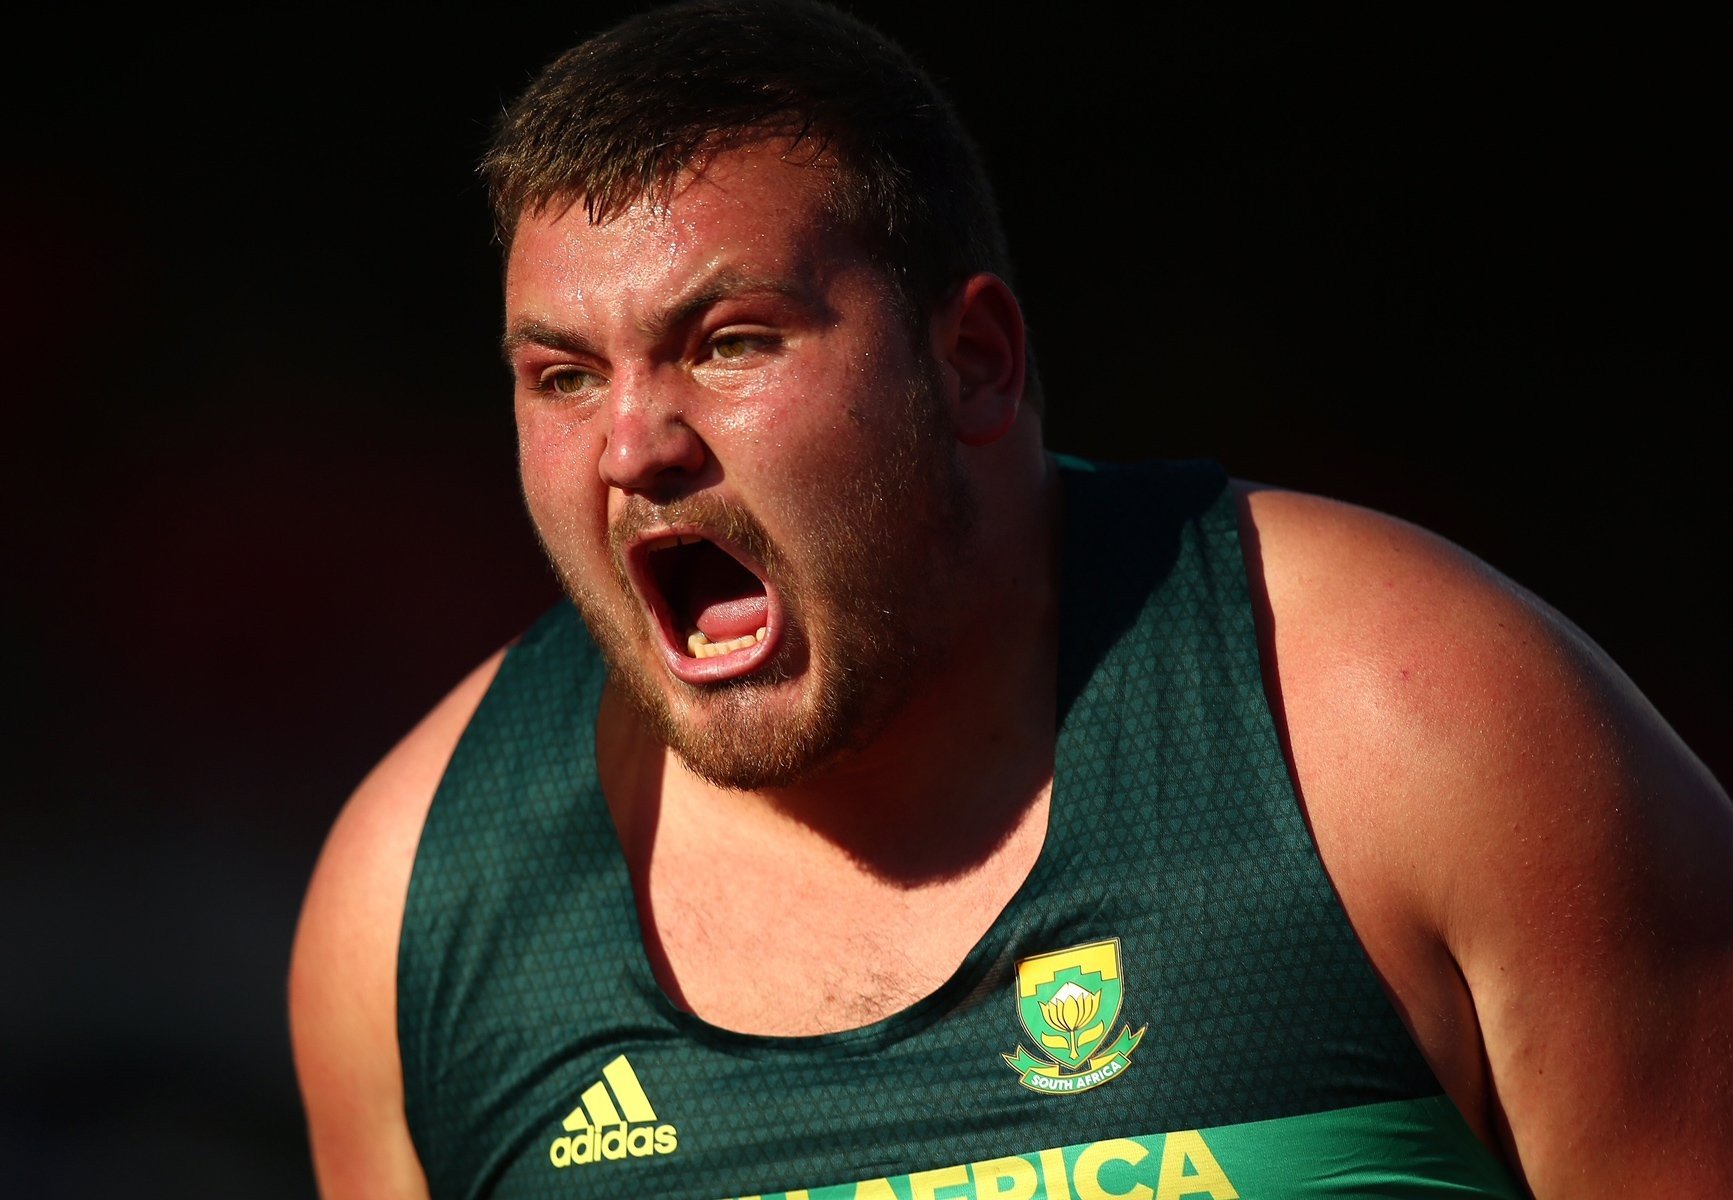 RSA's Kayle Blignaut wins men's Shot put final at the IAAF World U20 Championships in Tampere, Finland / Photo Credit: Getty Images for IAAF.